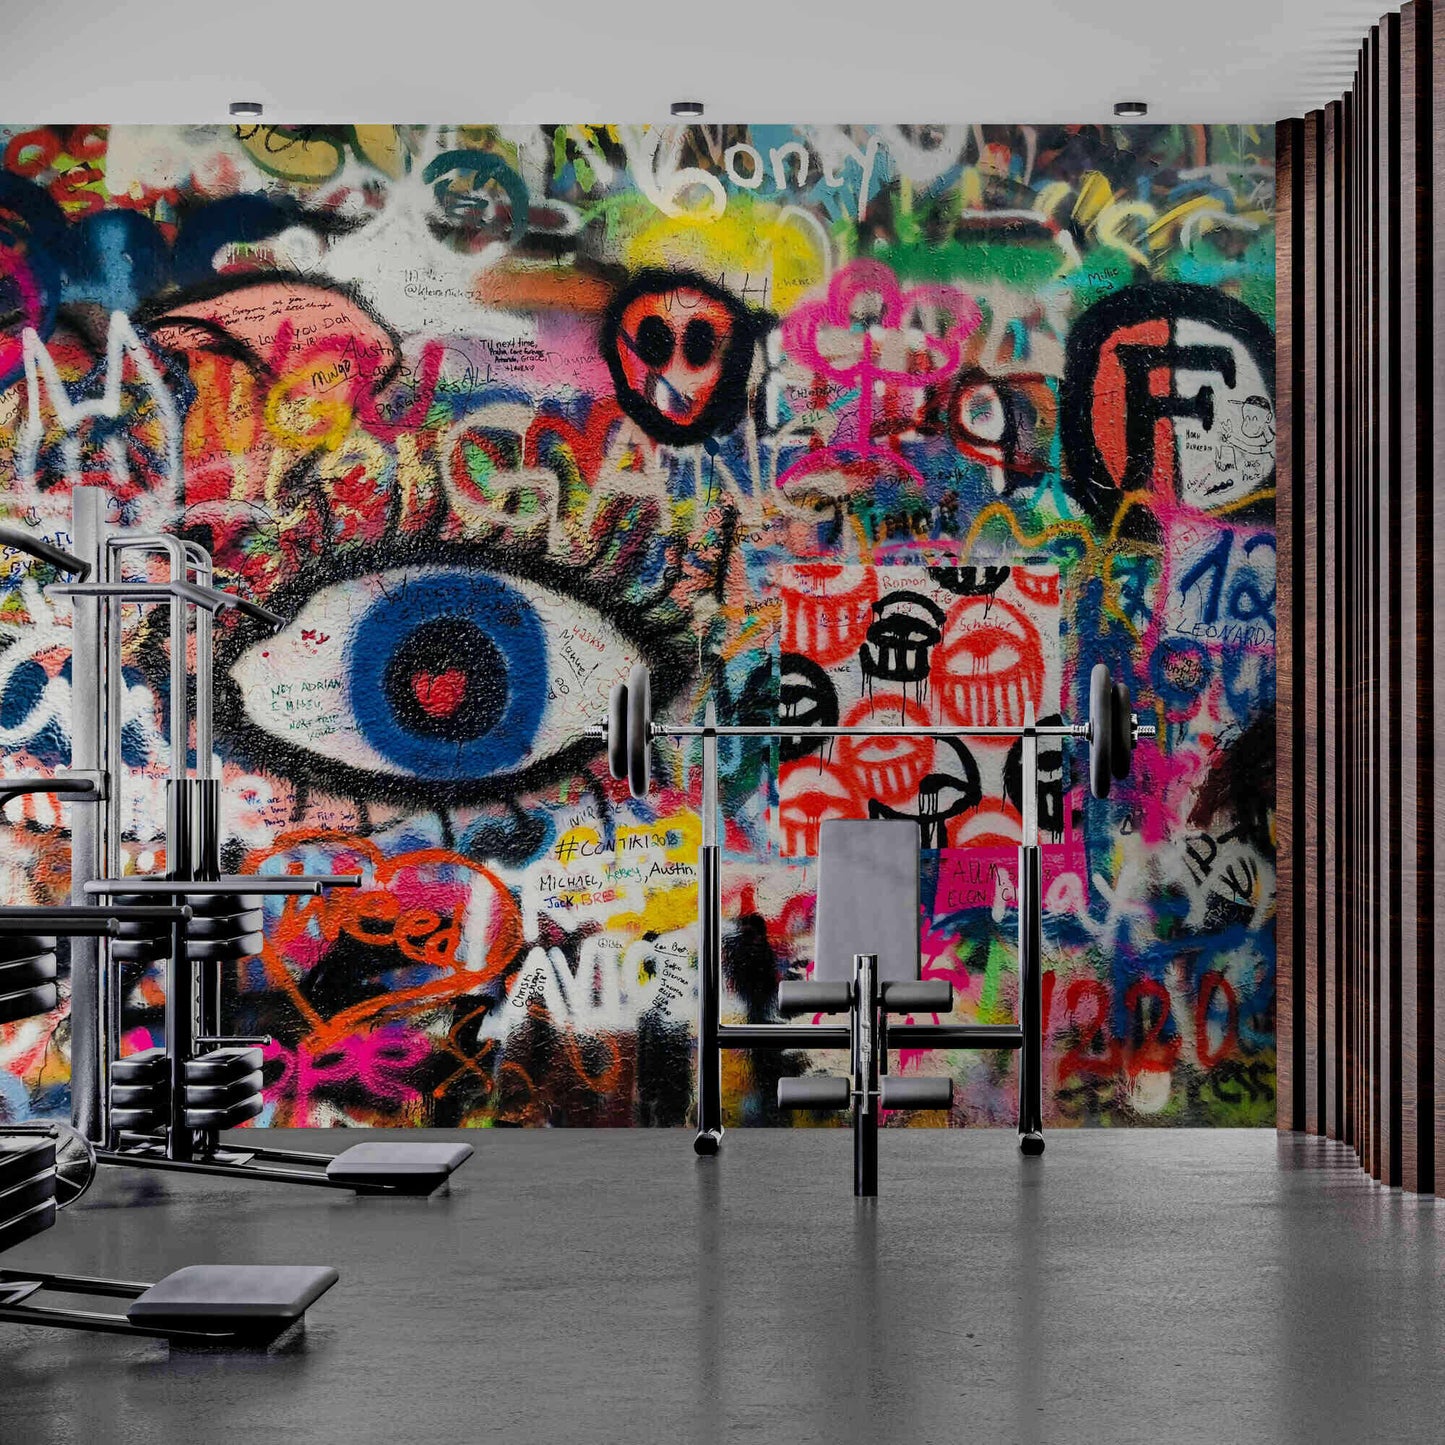 Personalized graffiti art mural transforming a bedroom wall with vibrant colors.